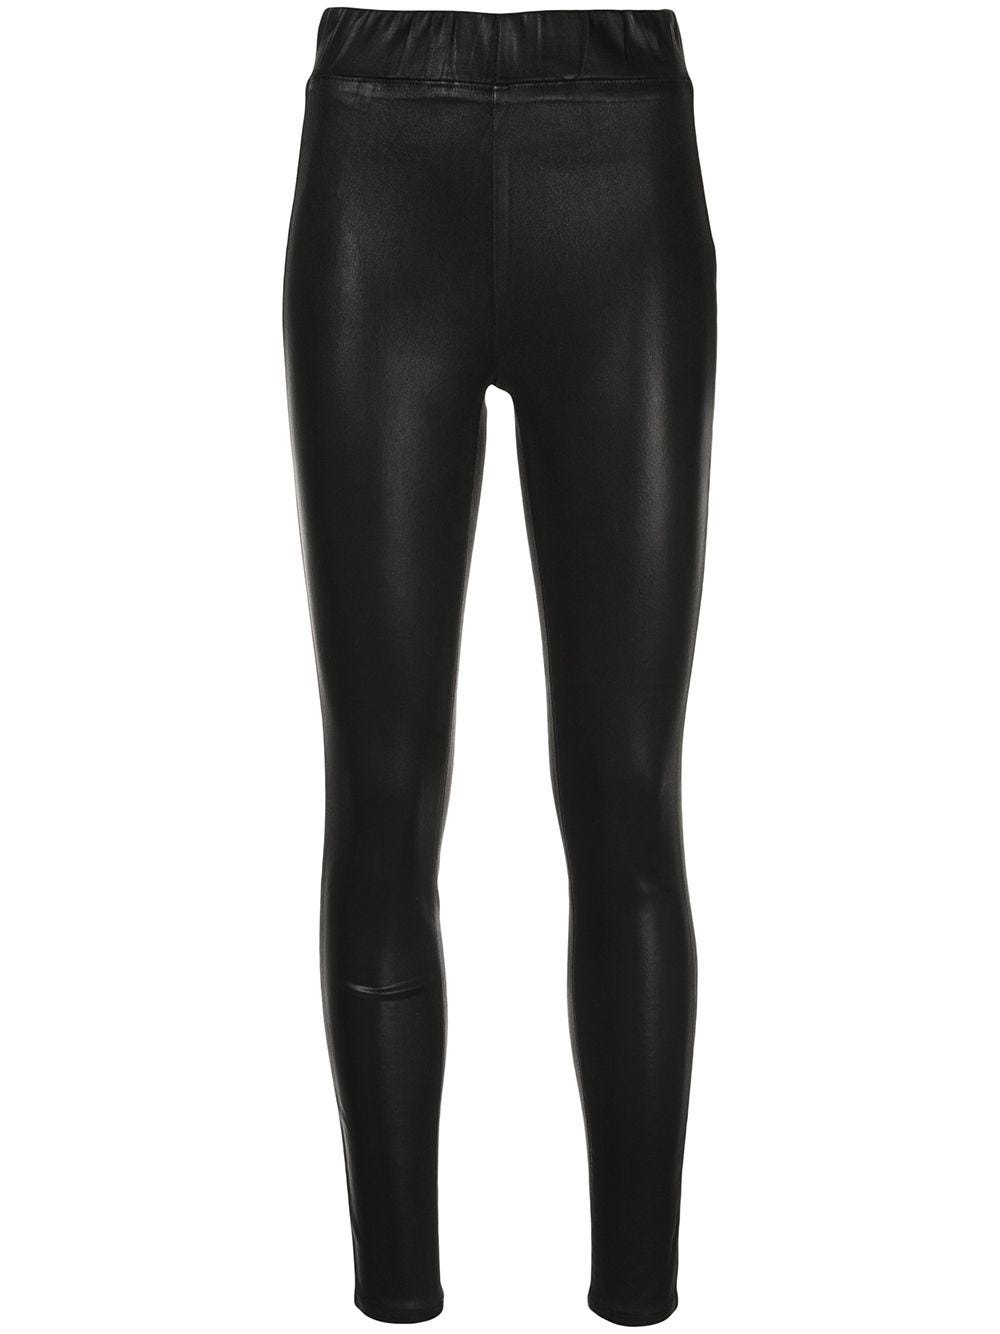 L AGENCE HHIGH-RISE FITTED LEGGINGS